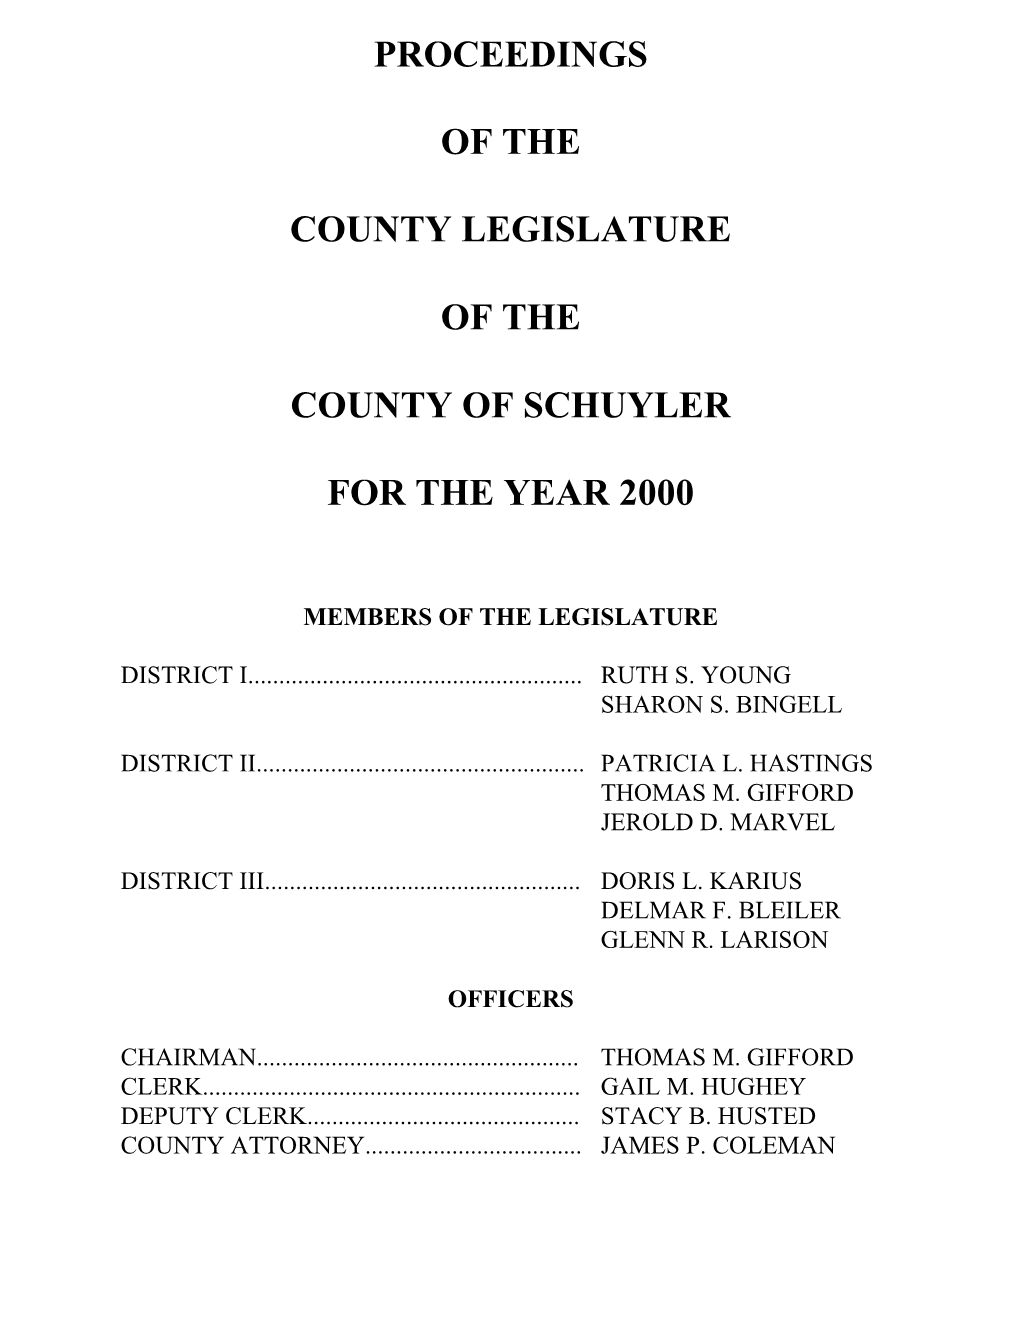 Minutes of the December 6, 1999 Public Hearing and December 13, 1999 Regular Meeting of the Schuyler County Legislature